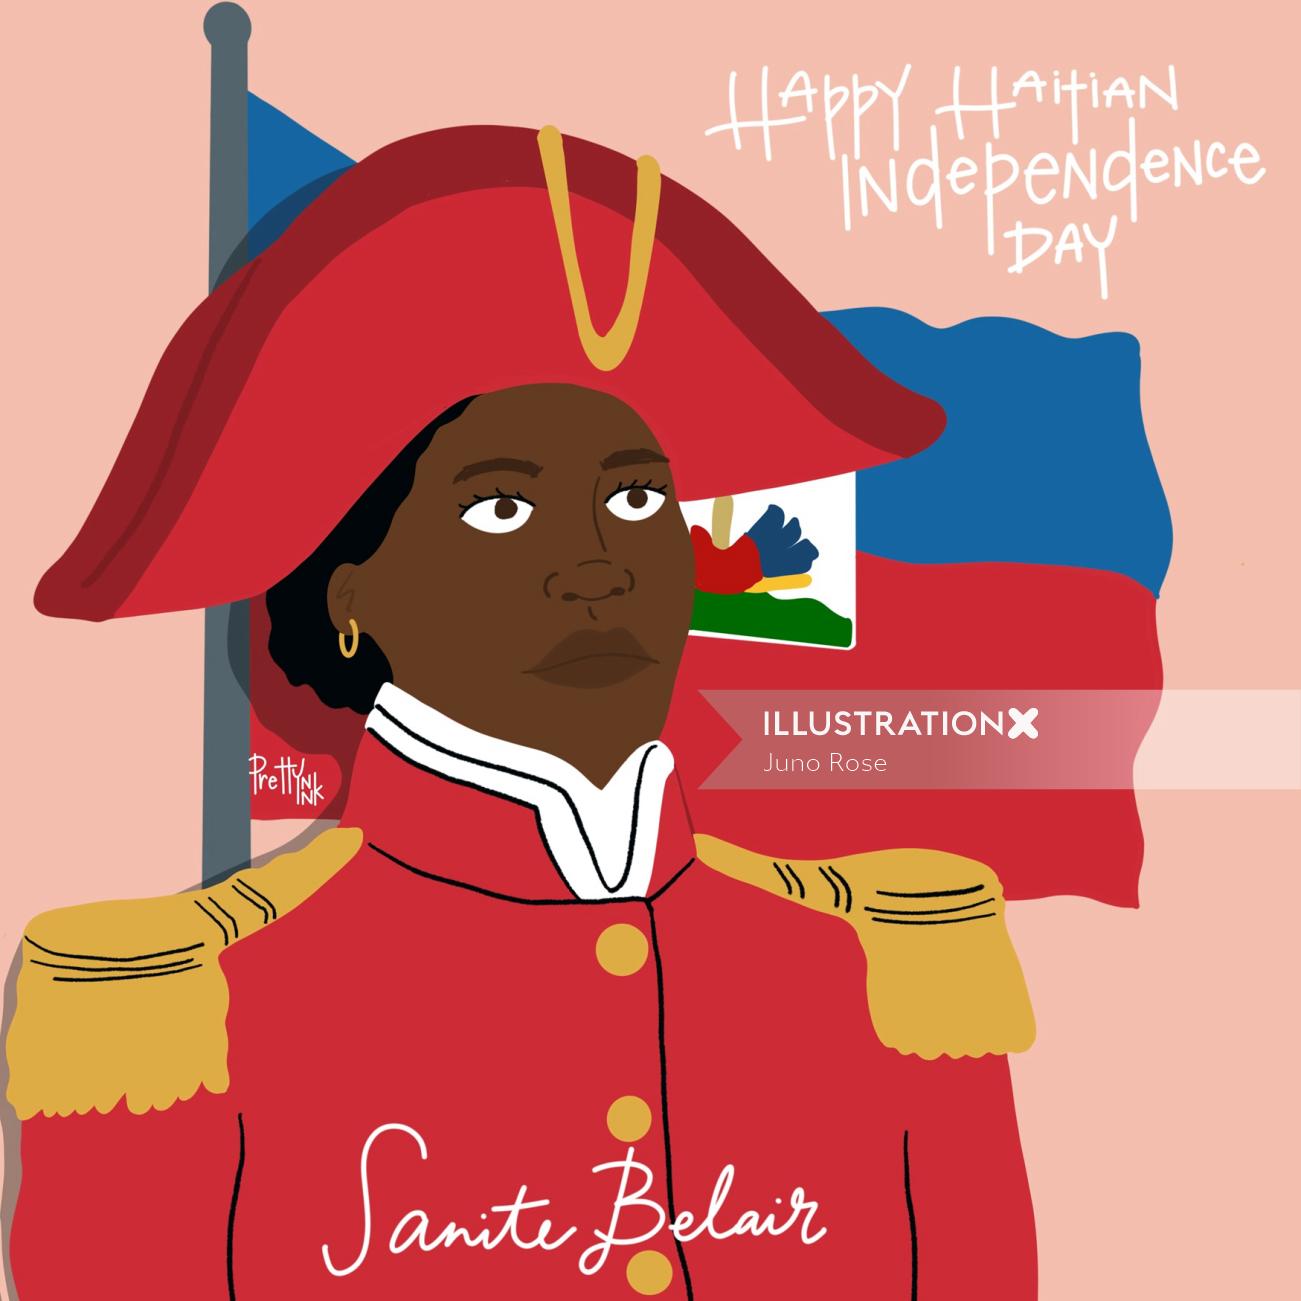 Portrayal of a Sainte Belair. Female Haitian Freedom fighter and revolutionary